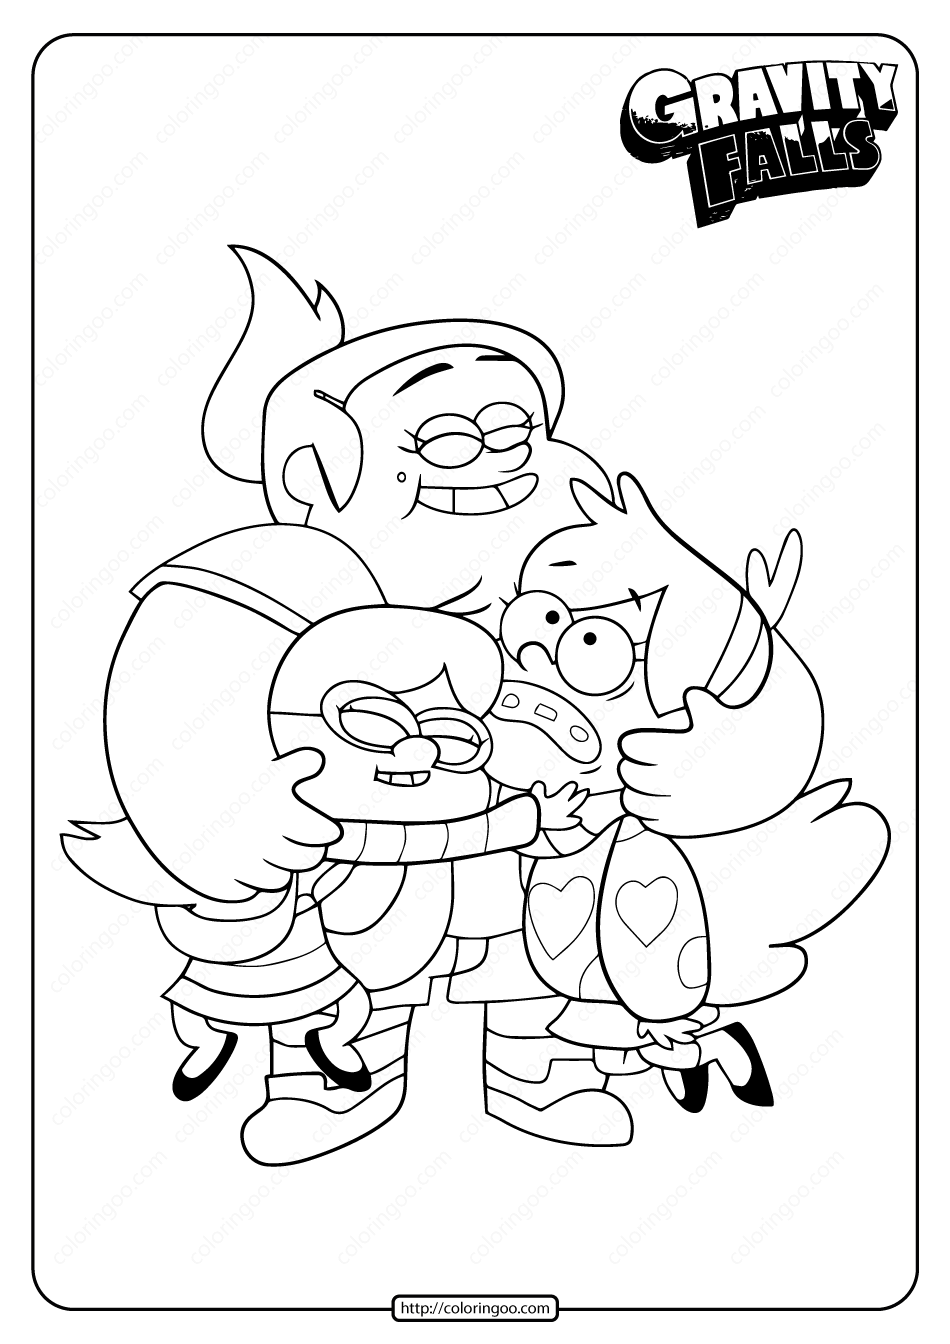 printable gravity falls best friends forever bbf coloring